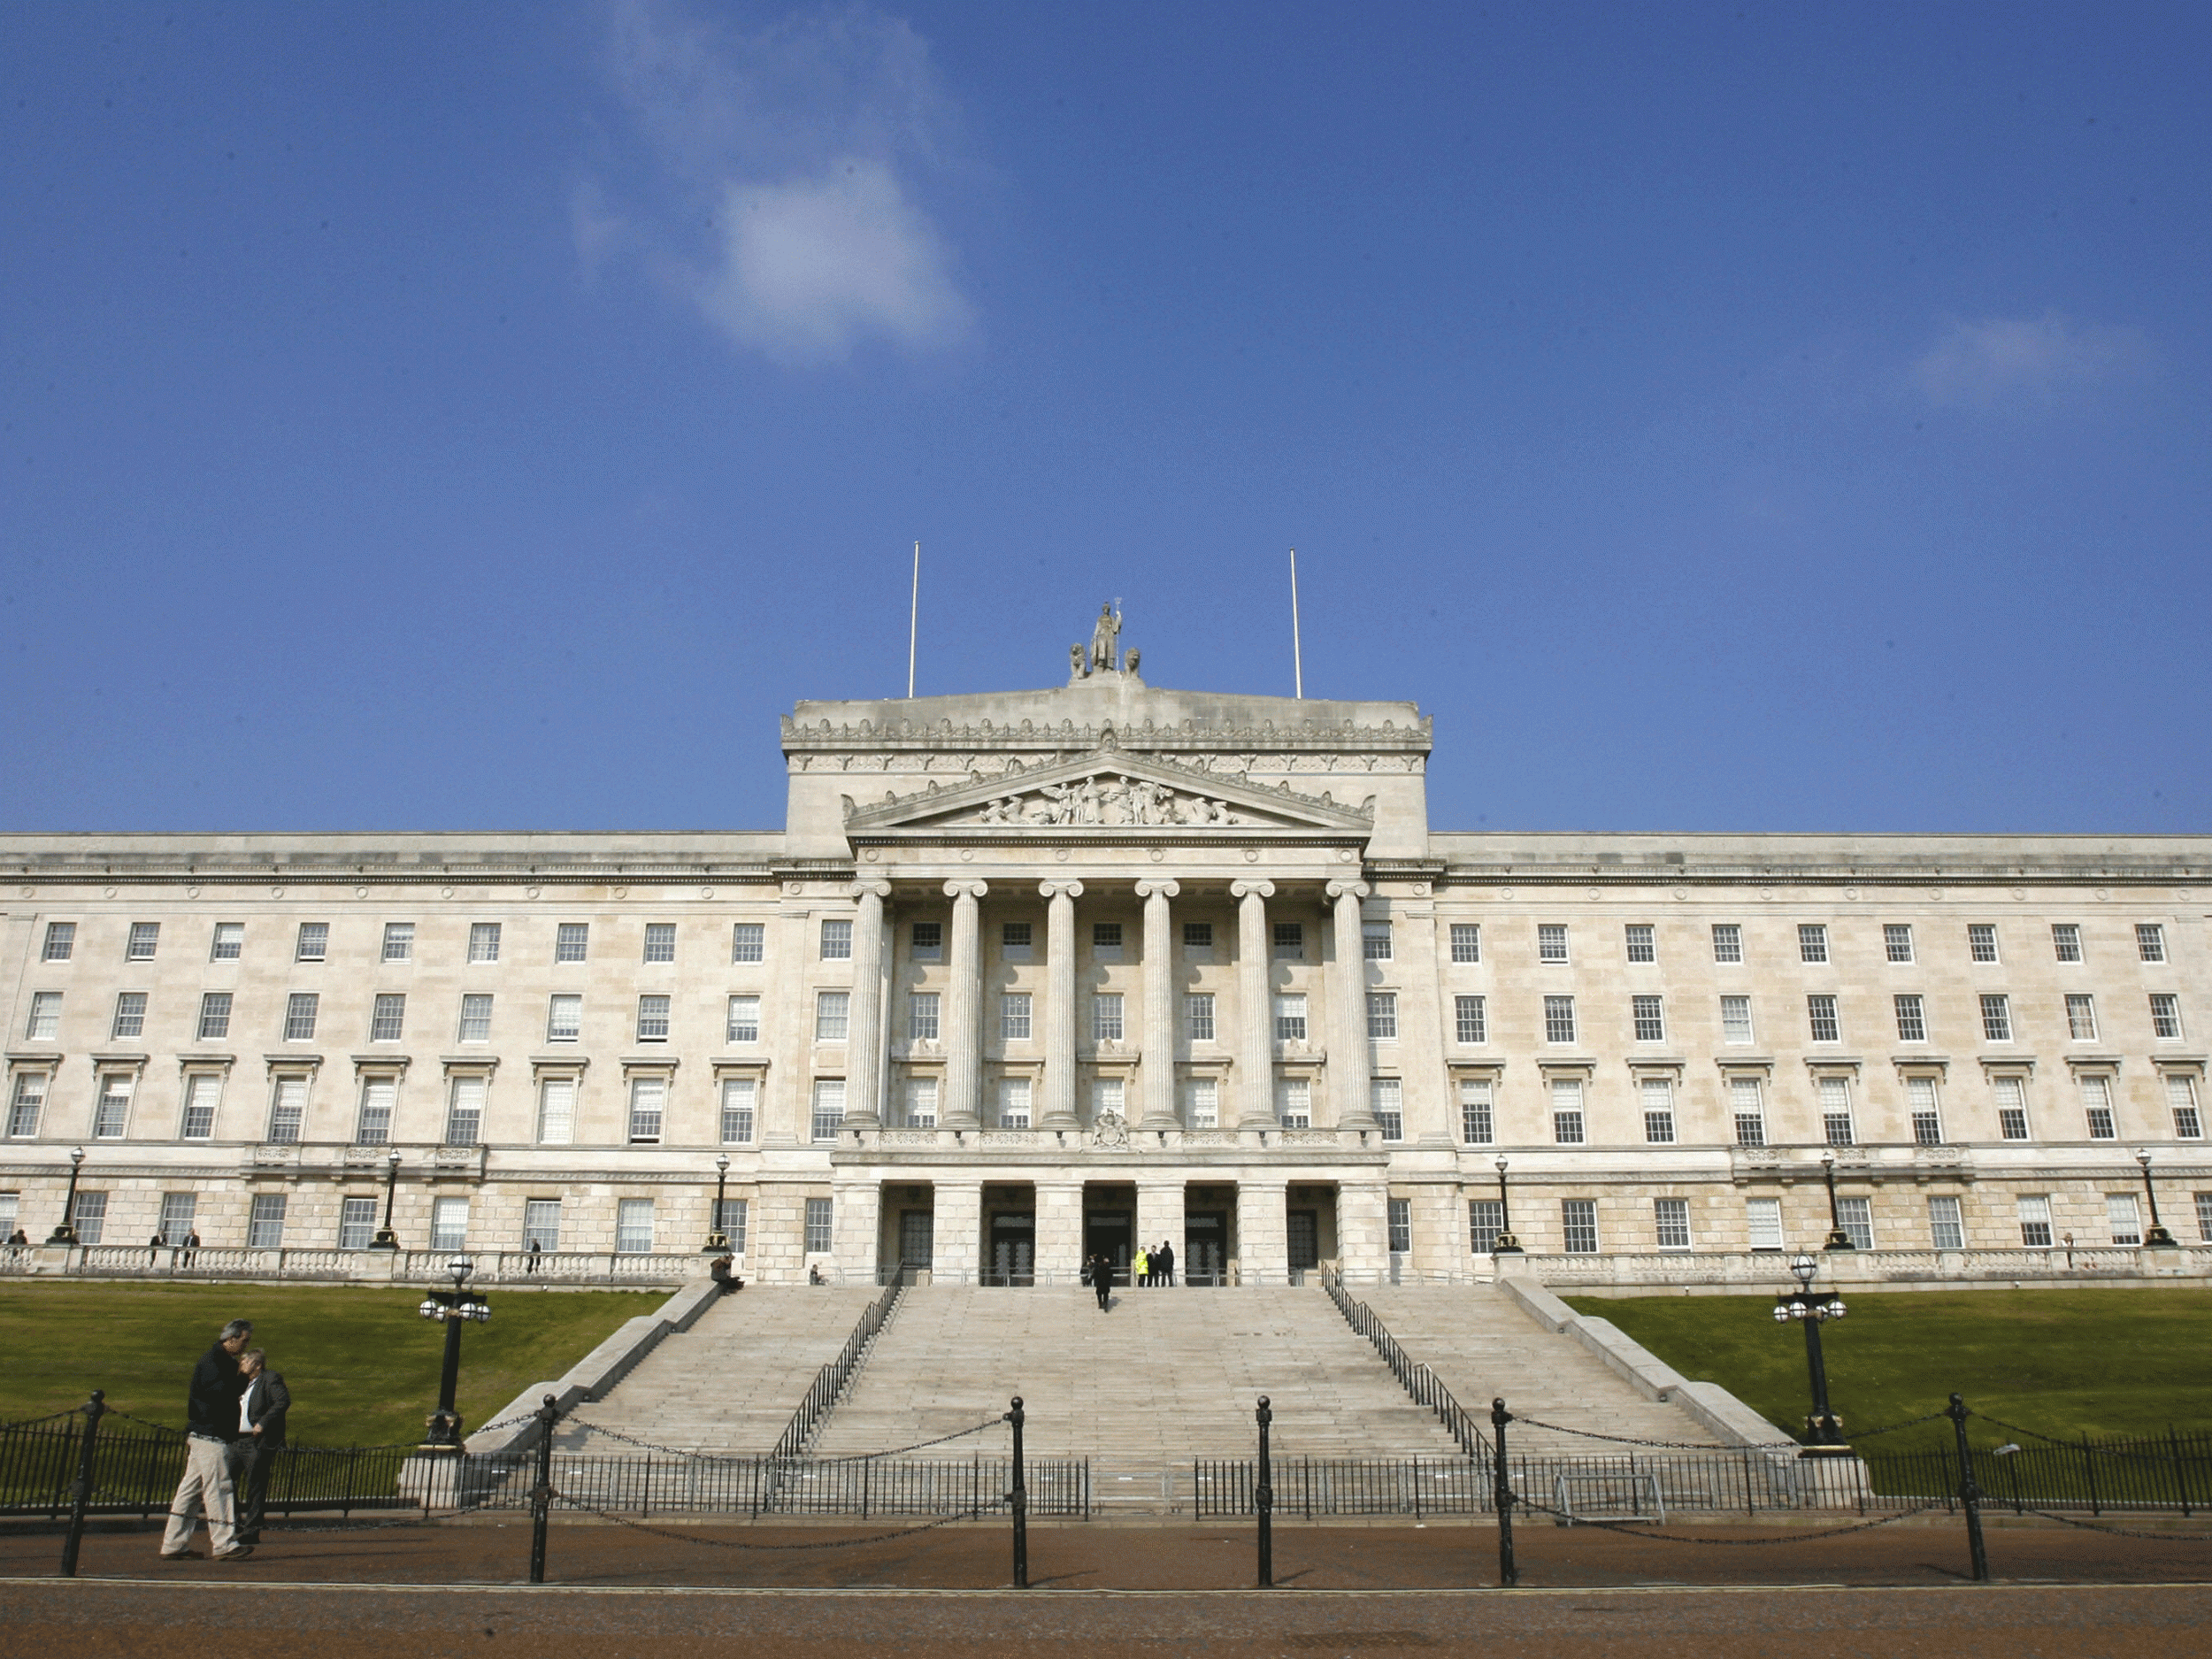 The Northern Ireland Assembly building at Stormont